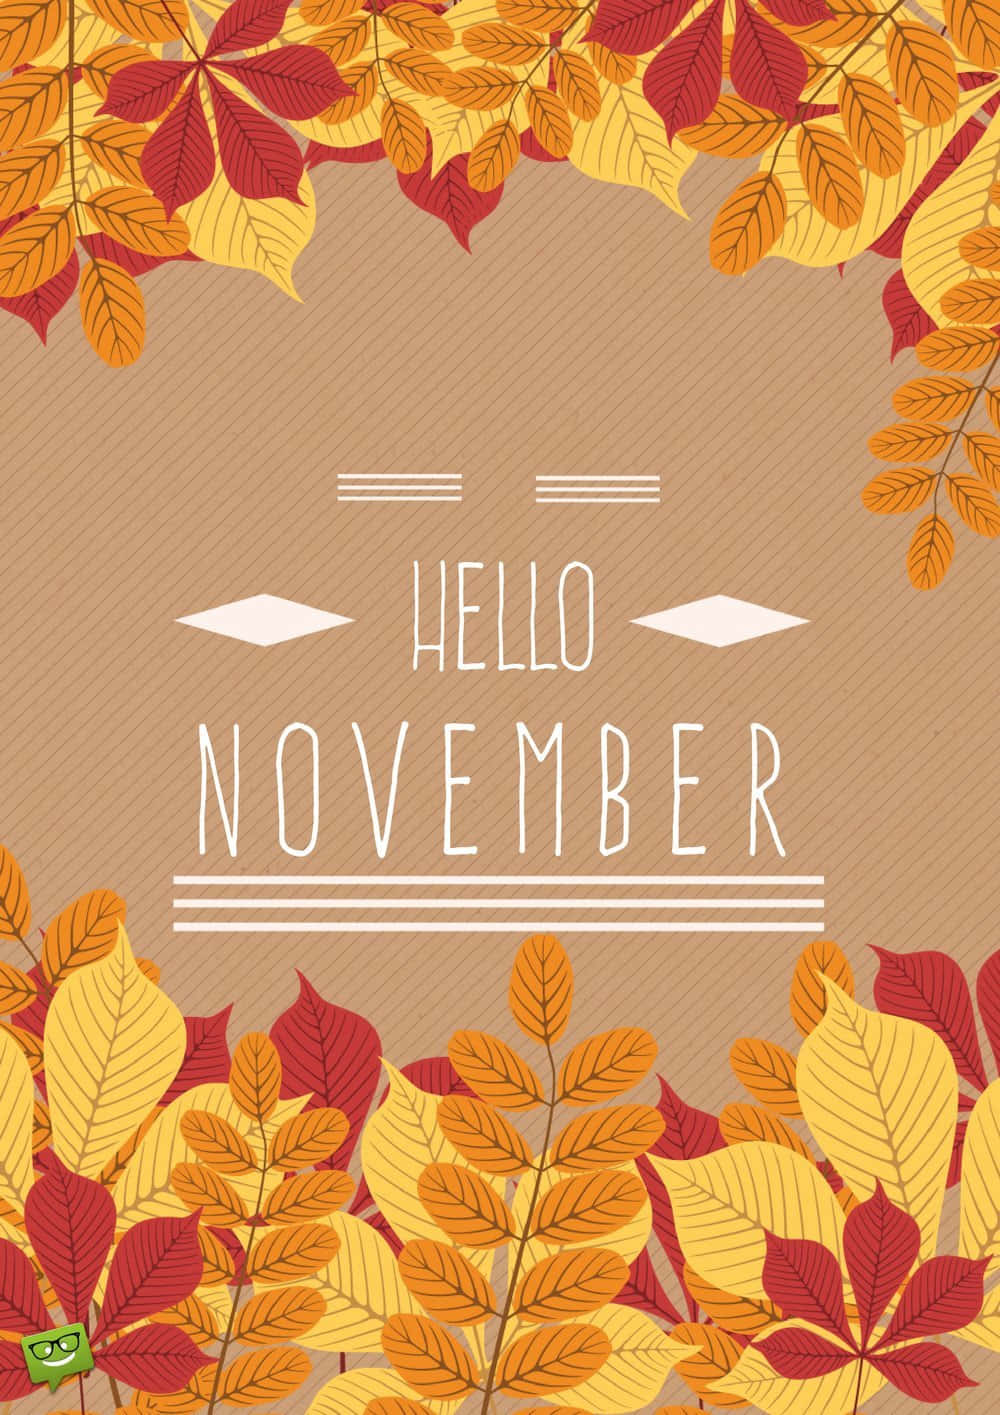 Let November set the tone for new and exciting possibilities